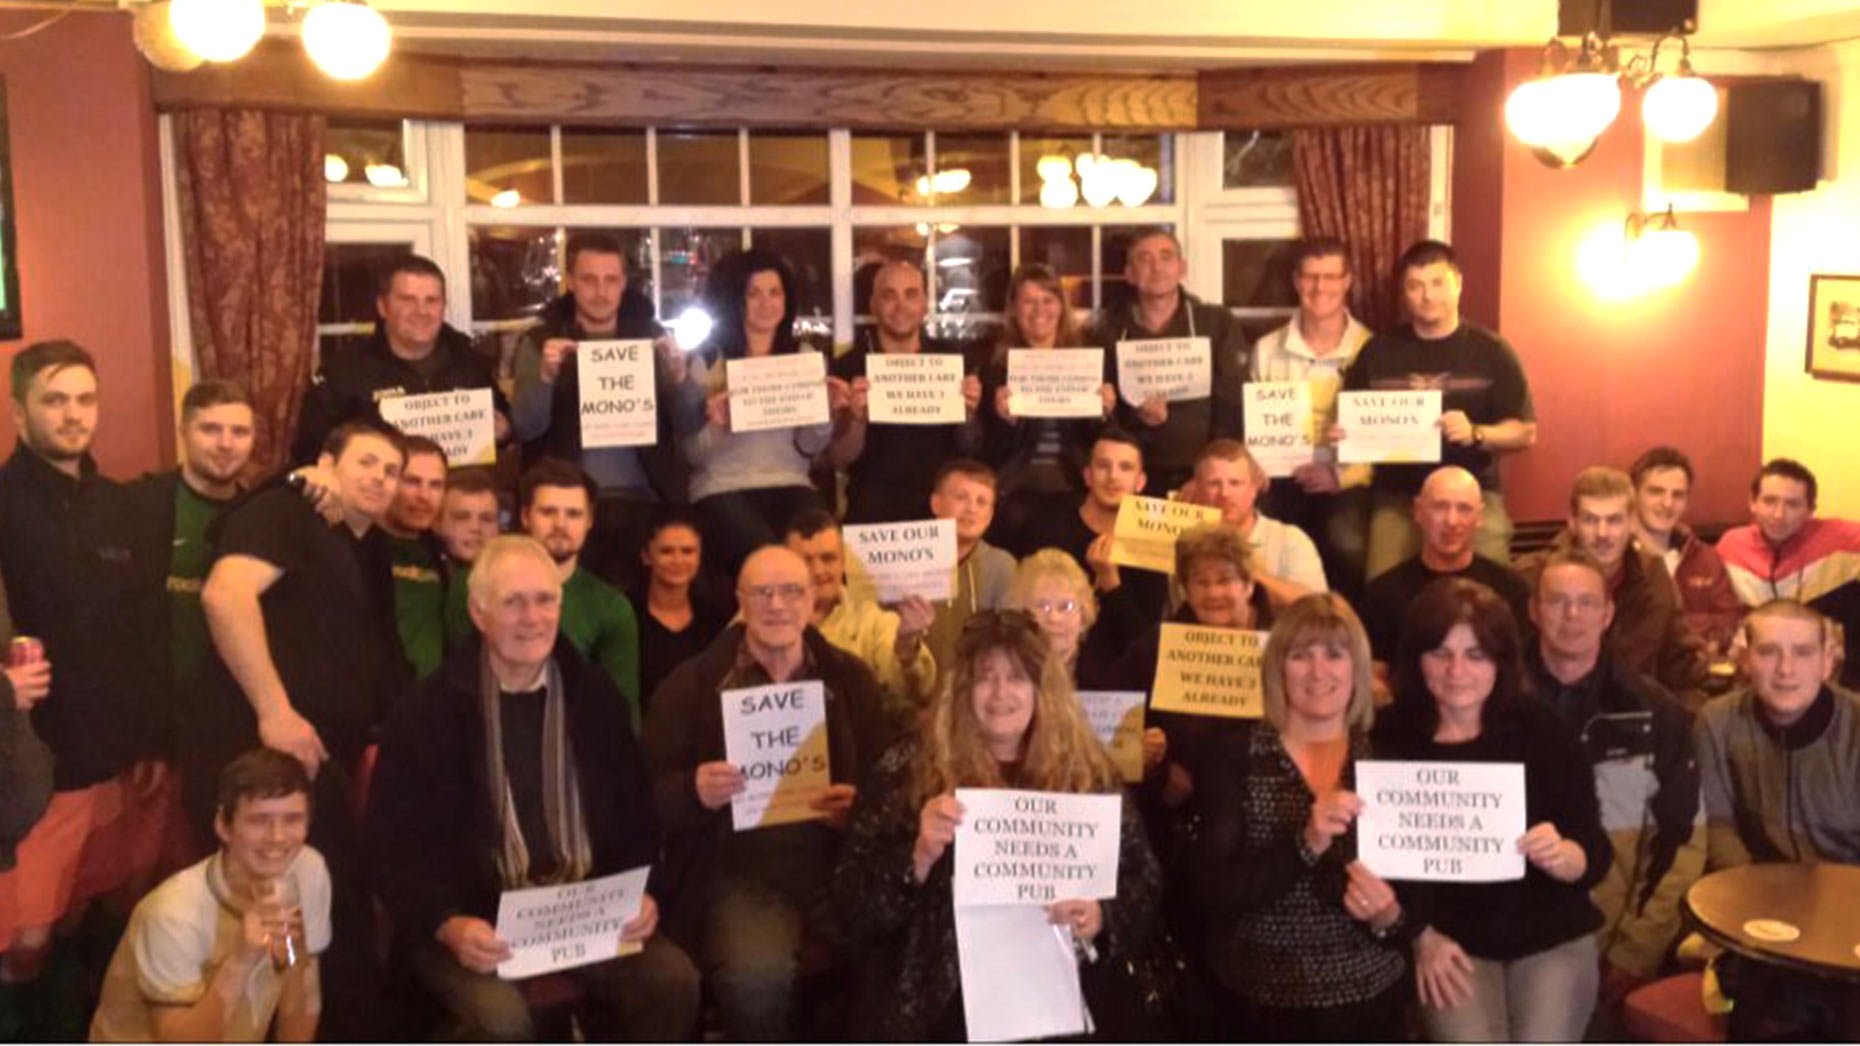 Locals in The Monson Arms Pub on Skellingthorpe Road campaigning against its closure. 